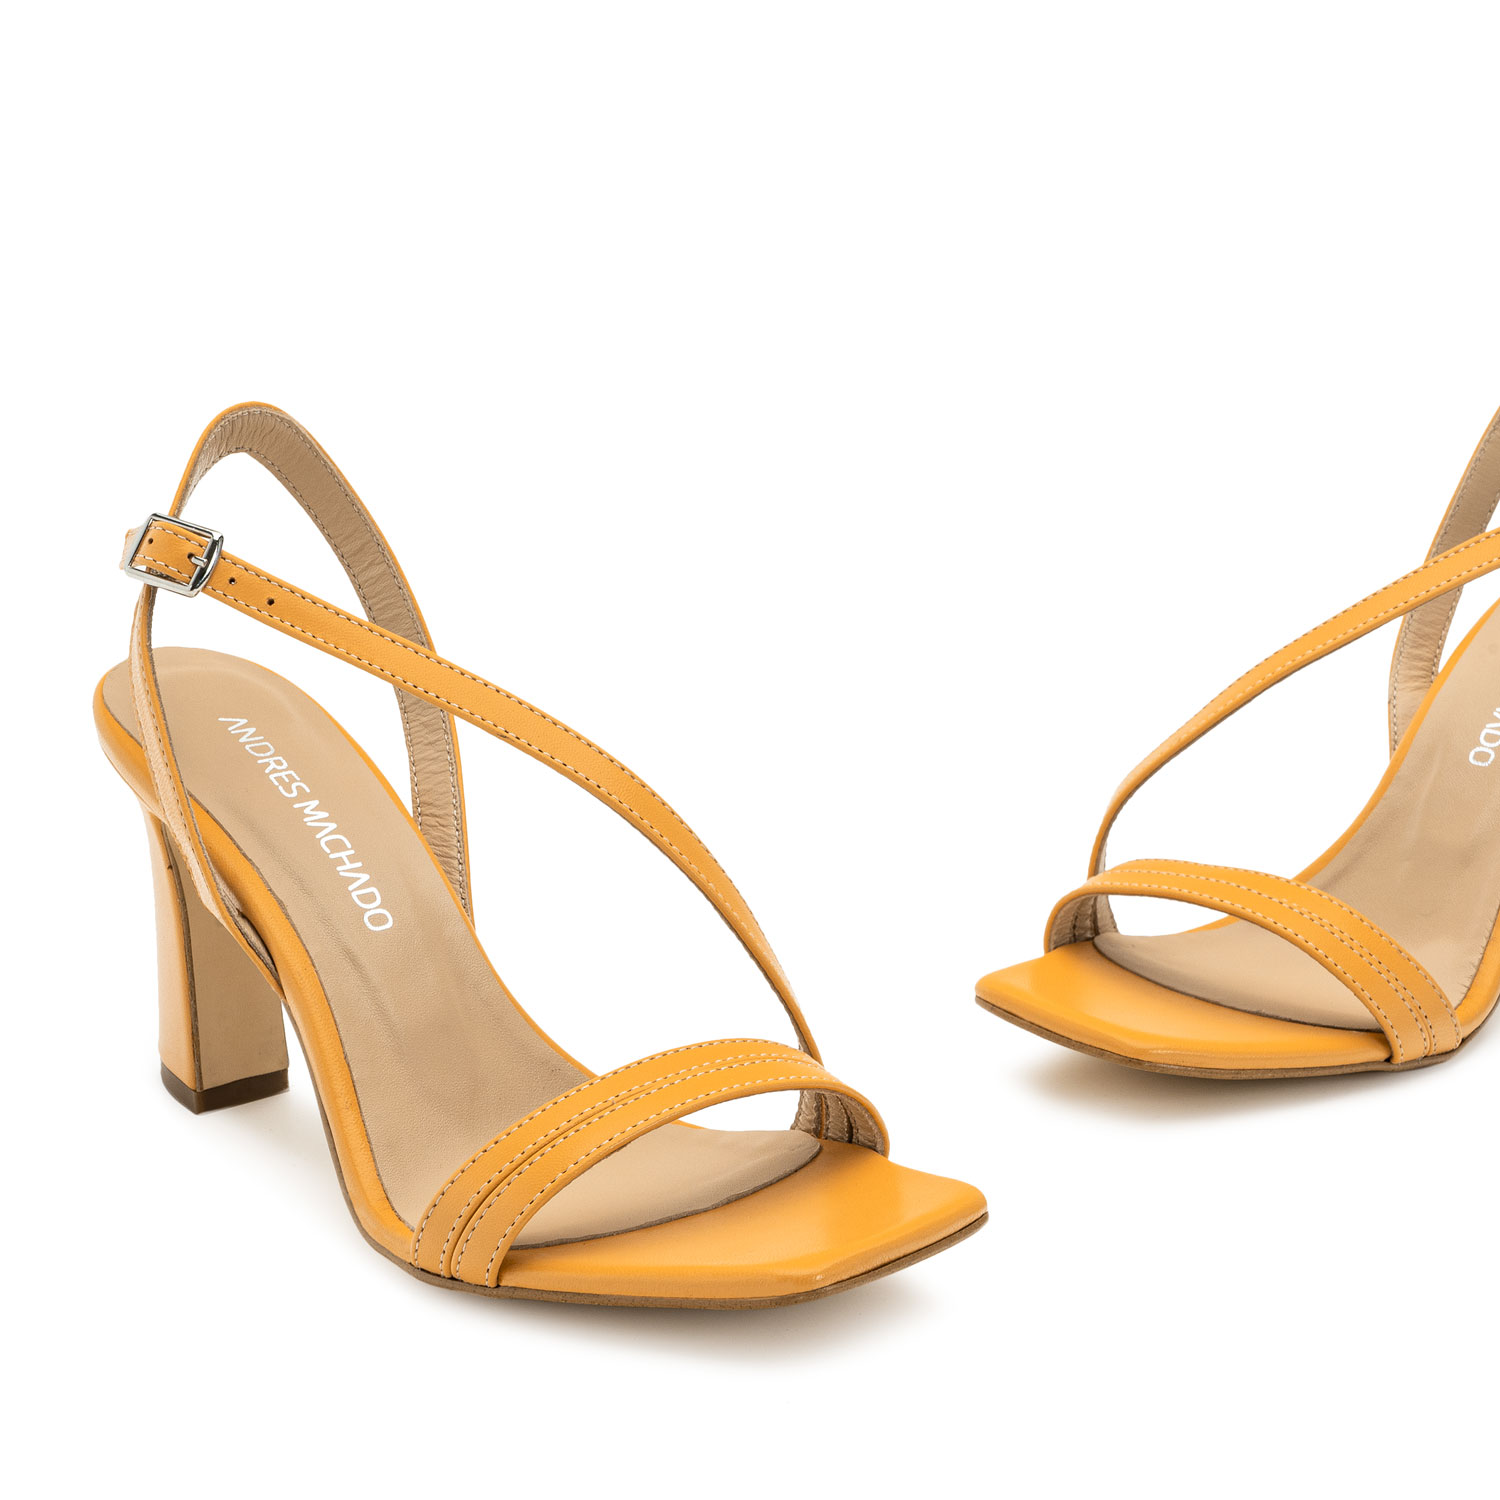 Crossover Heeled Sandals in Orange Leather 